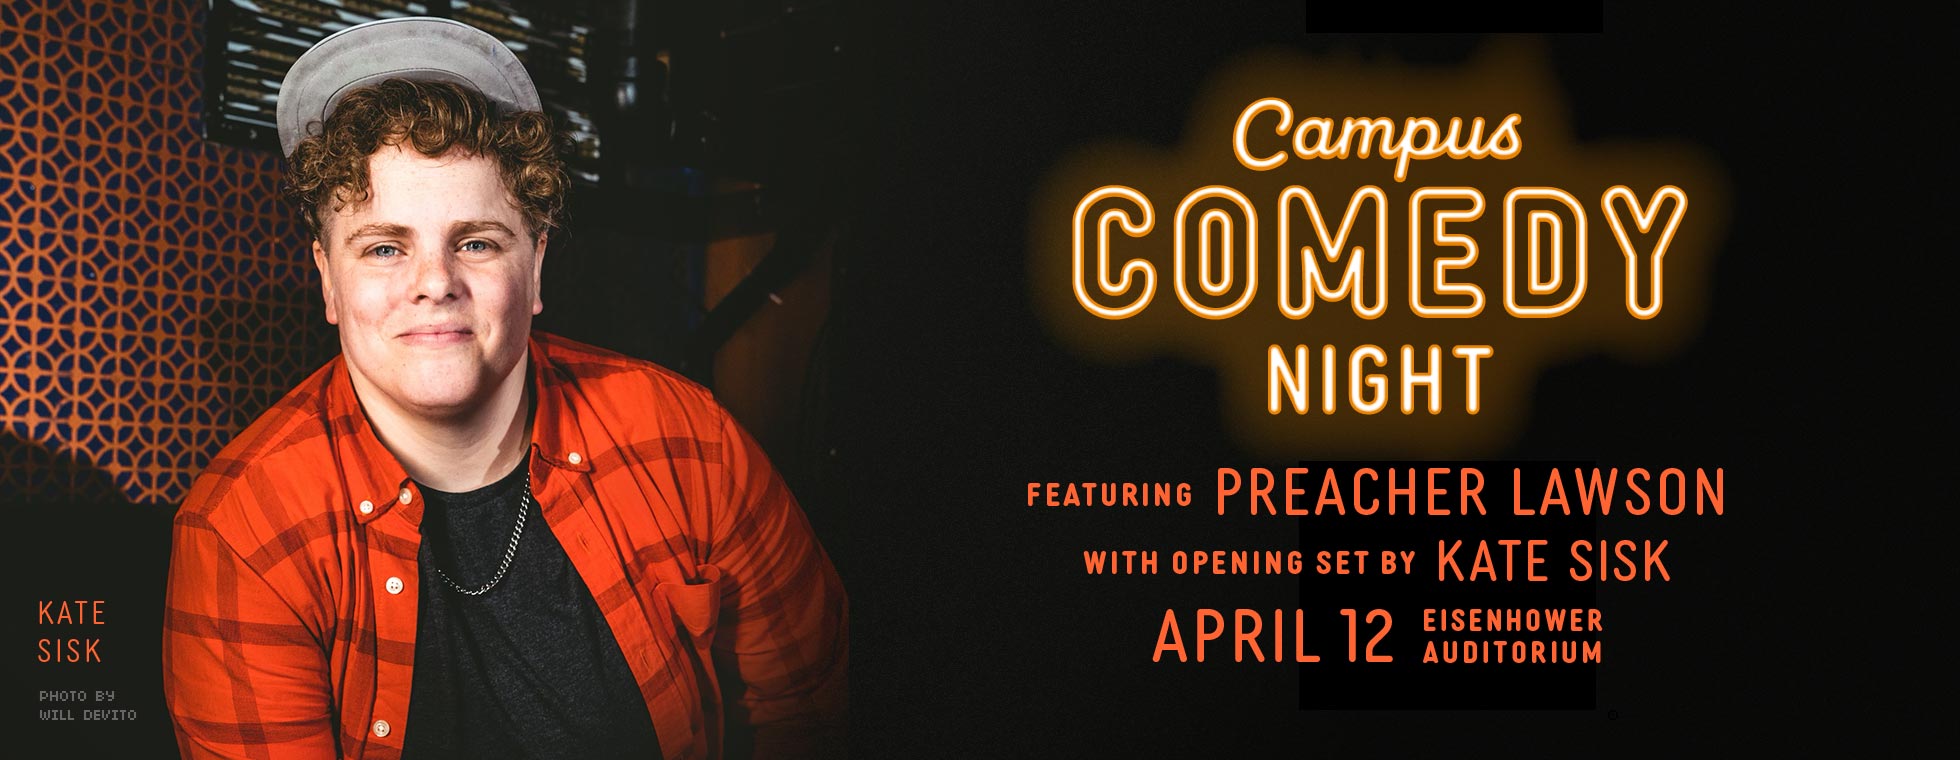 Campus Comedy Night Center for the Performing Arts at Penn State